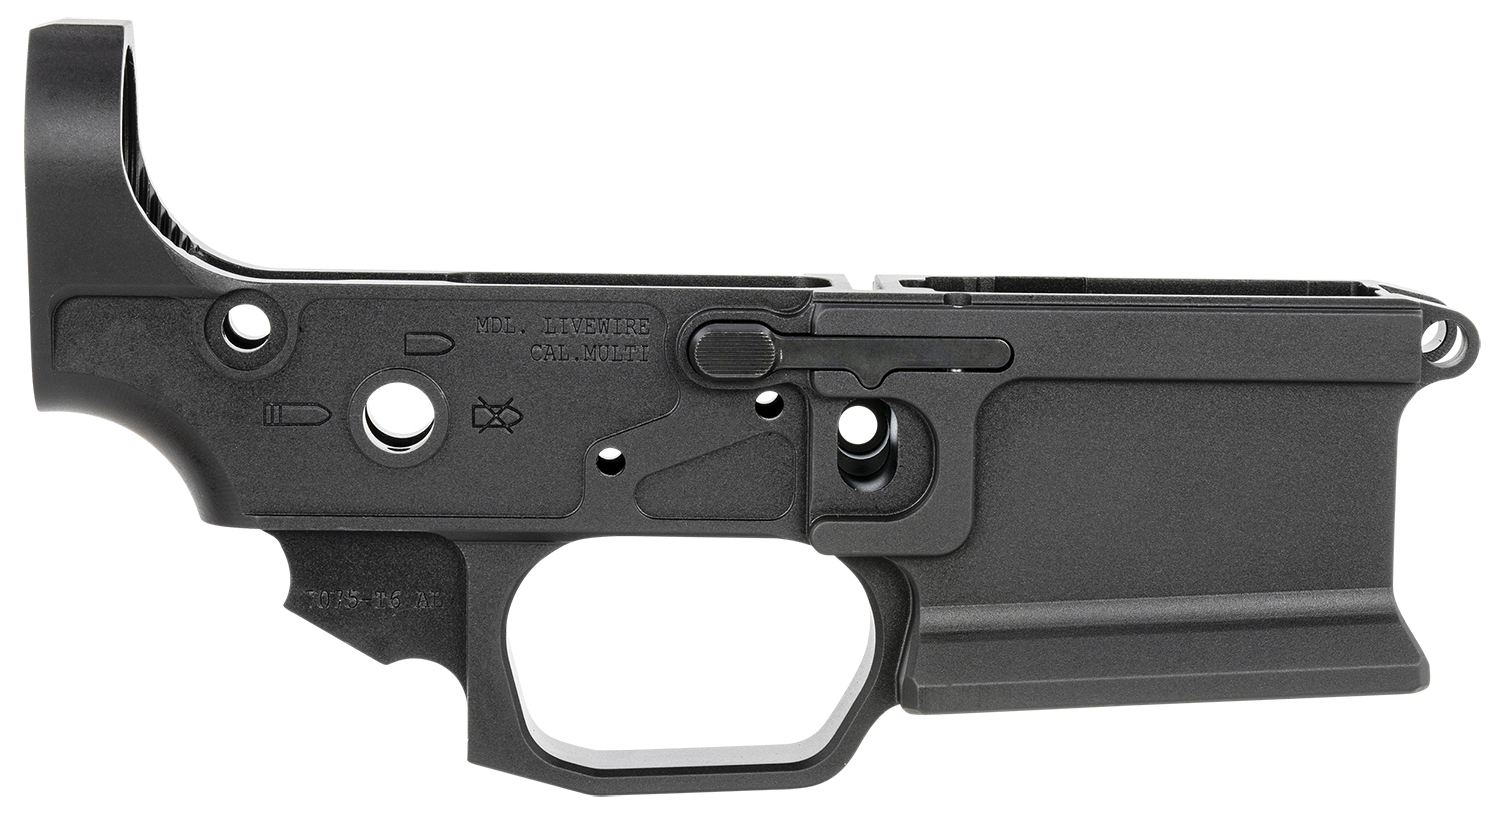 SHARPS BROS. LIVEWIRE AMBI AR-15 STRIPPED LOWER FORGED